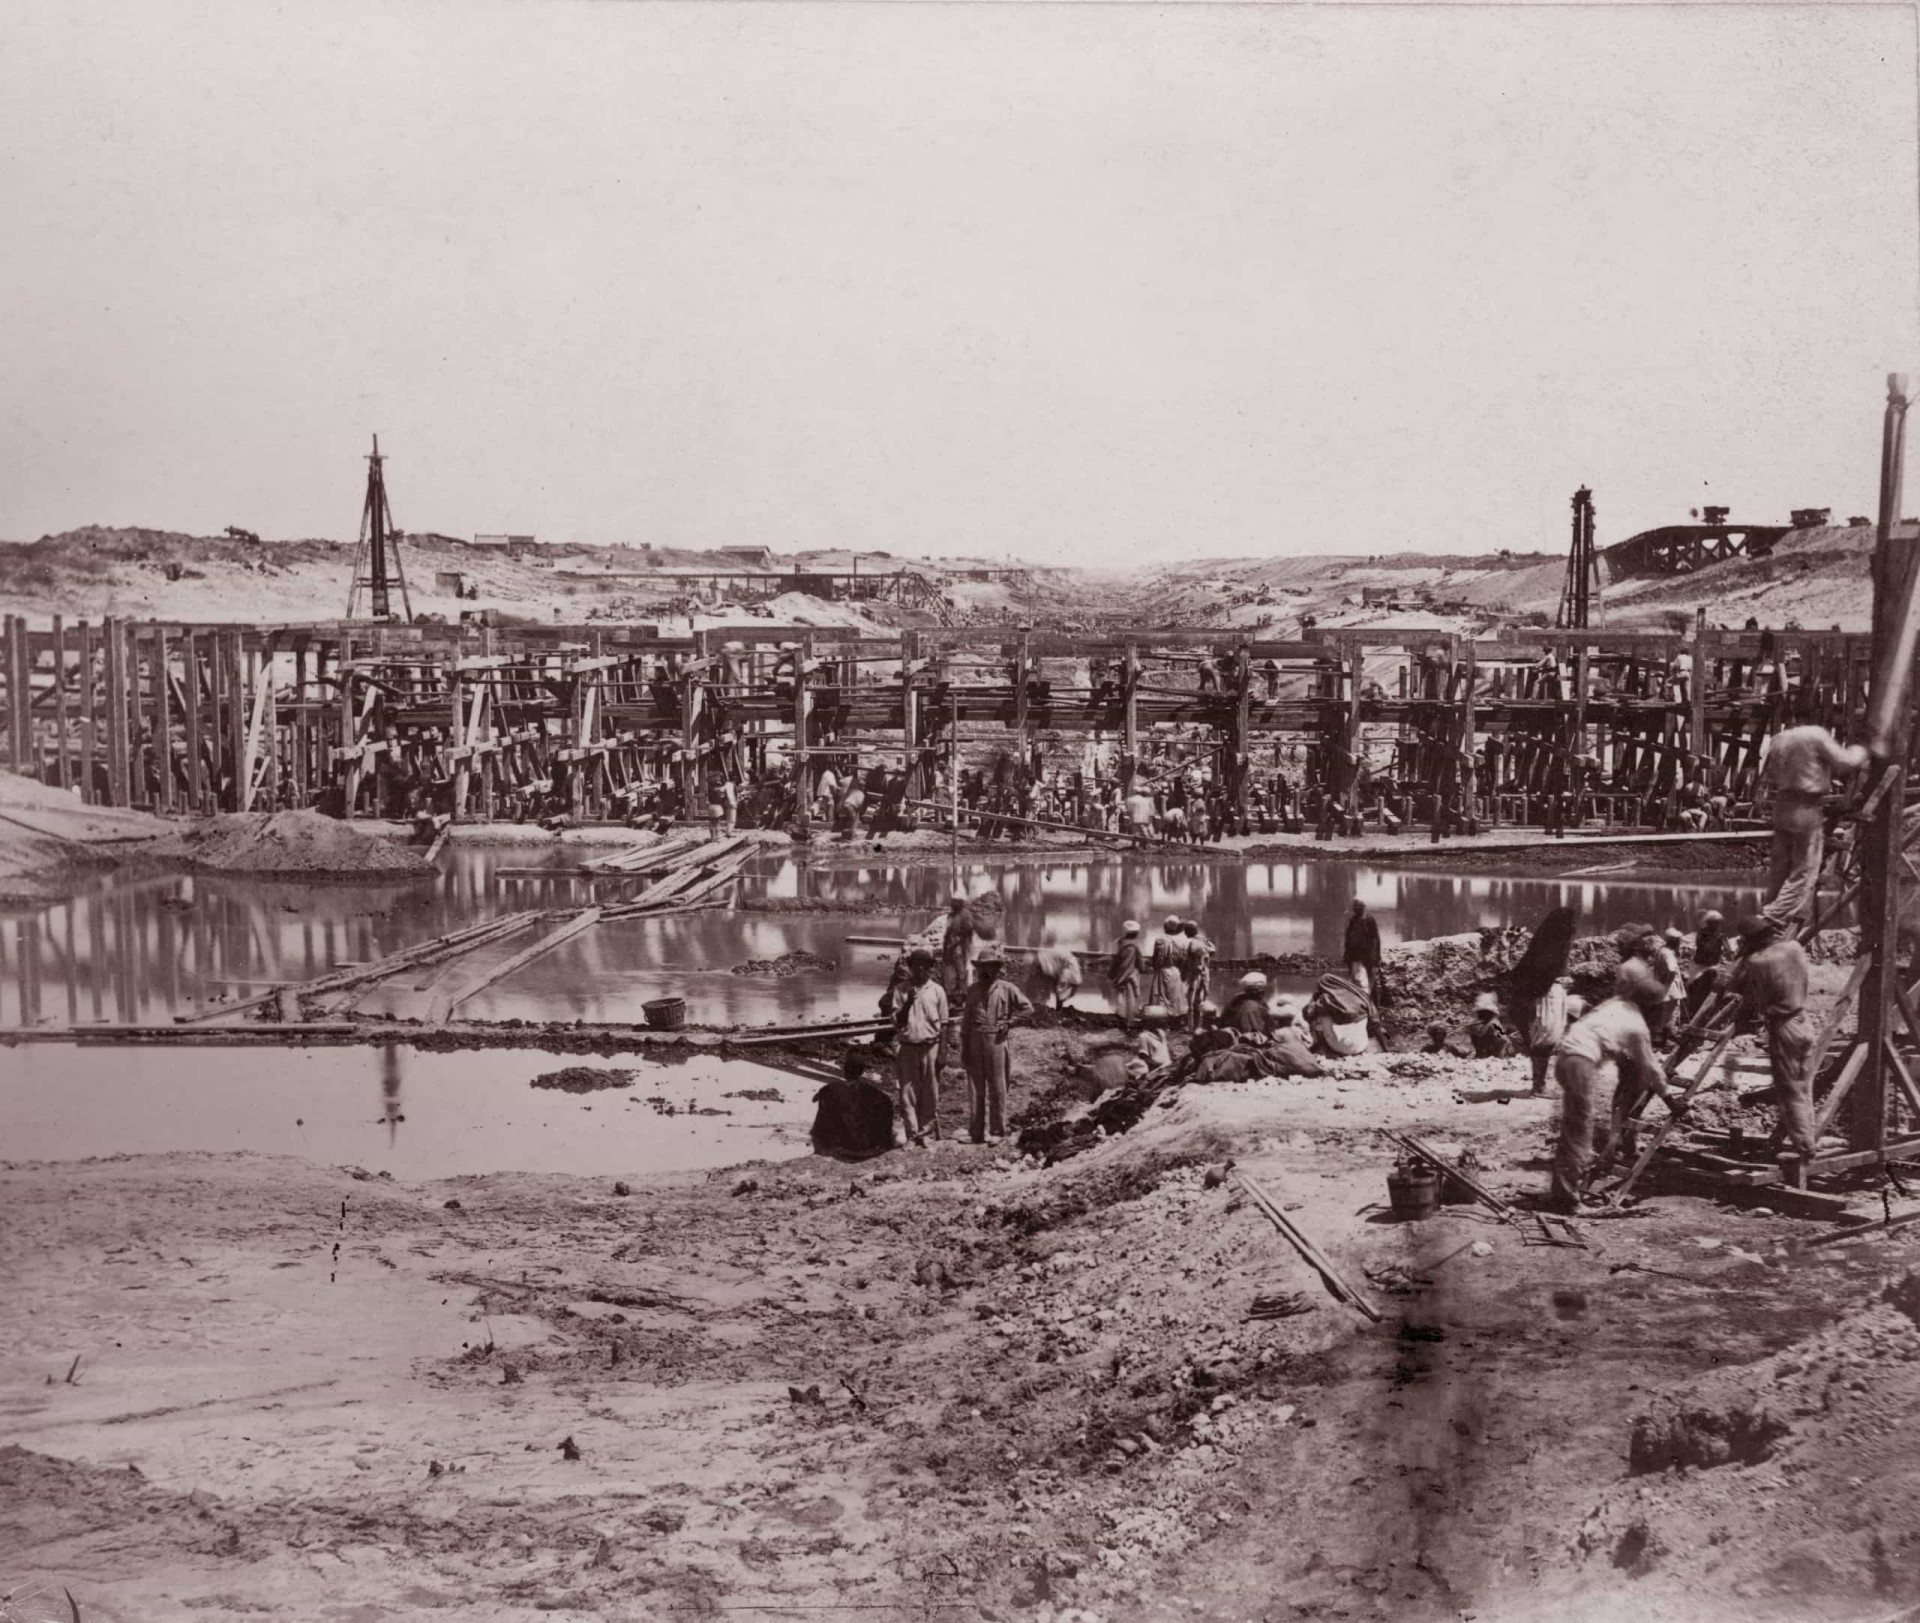 <p>The Egyptian government initially supplied most of the labor. Thousands of Egyptian <em>fellahs</em>, or peasants, were employed on low pay and under threat of violence to dig the early sections of the canal by hand. Some sources estimate that over 30,000 people were working on the canal at any one time.</p>